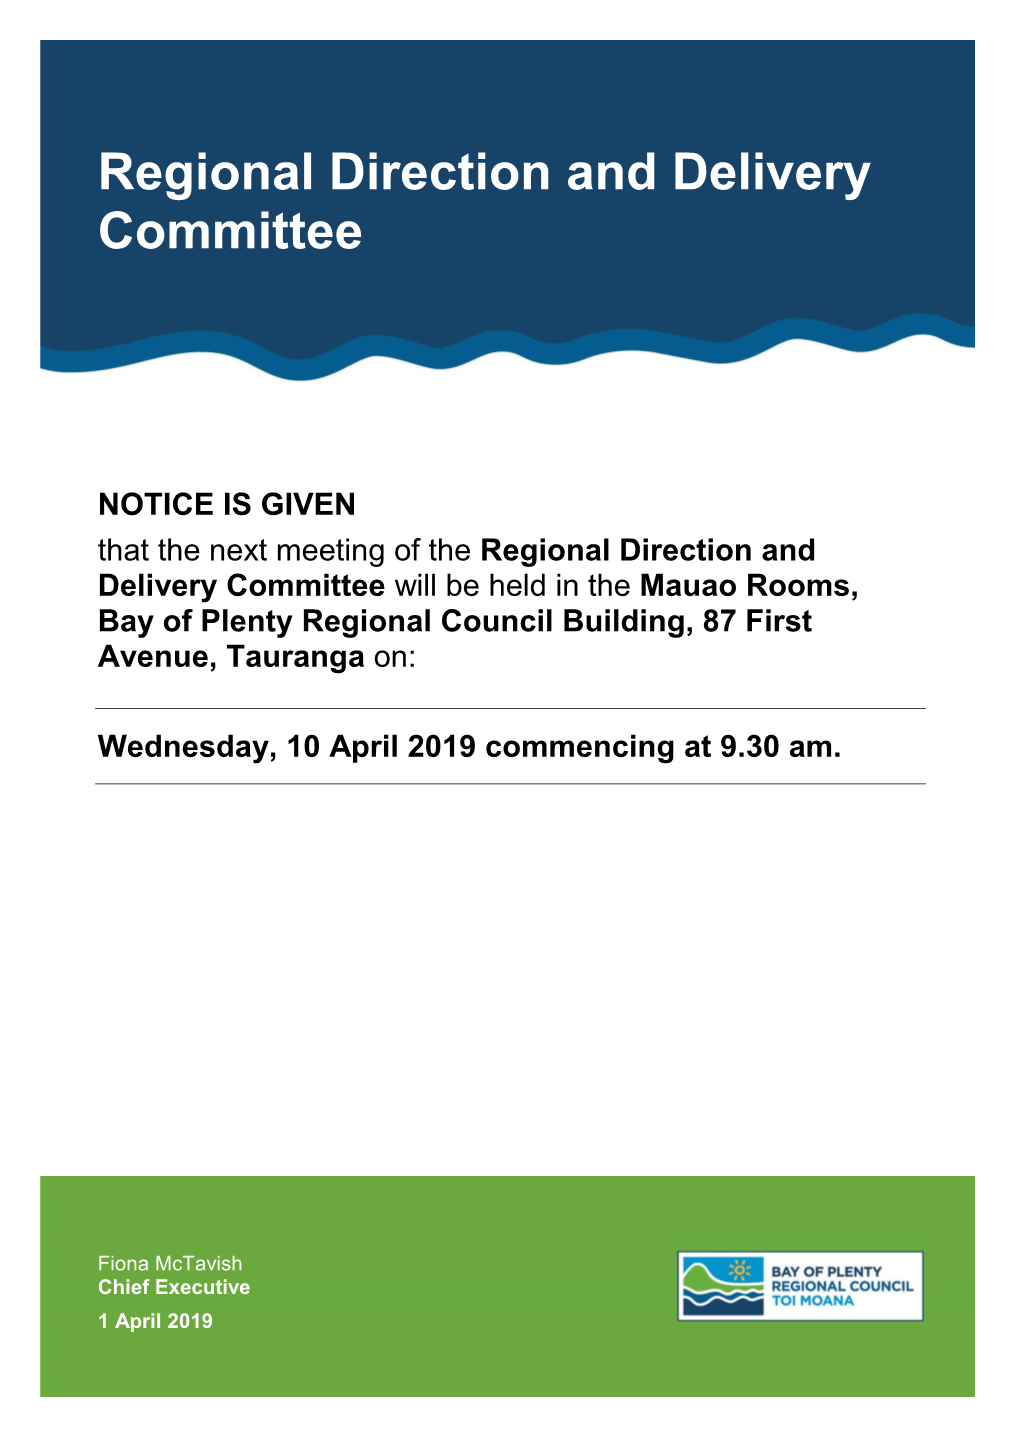 Regional Direction and Delivery Committee Will Be Held in the Mauao Rooms, Bay of Plenty Regional Council Building, 87 First Avenue, Tauranga On